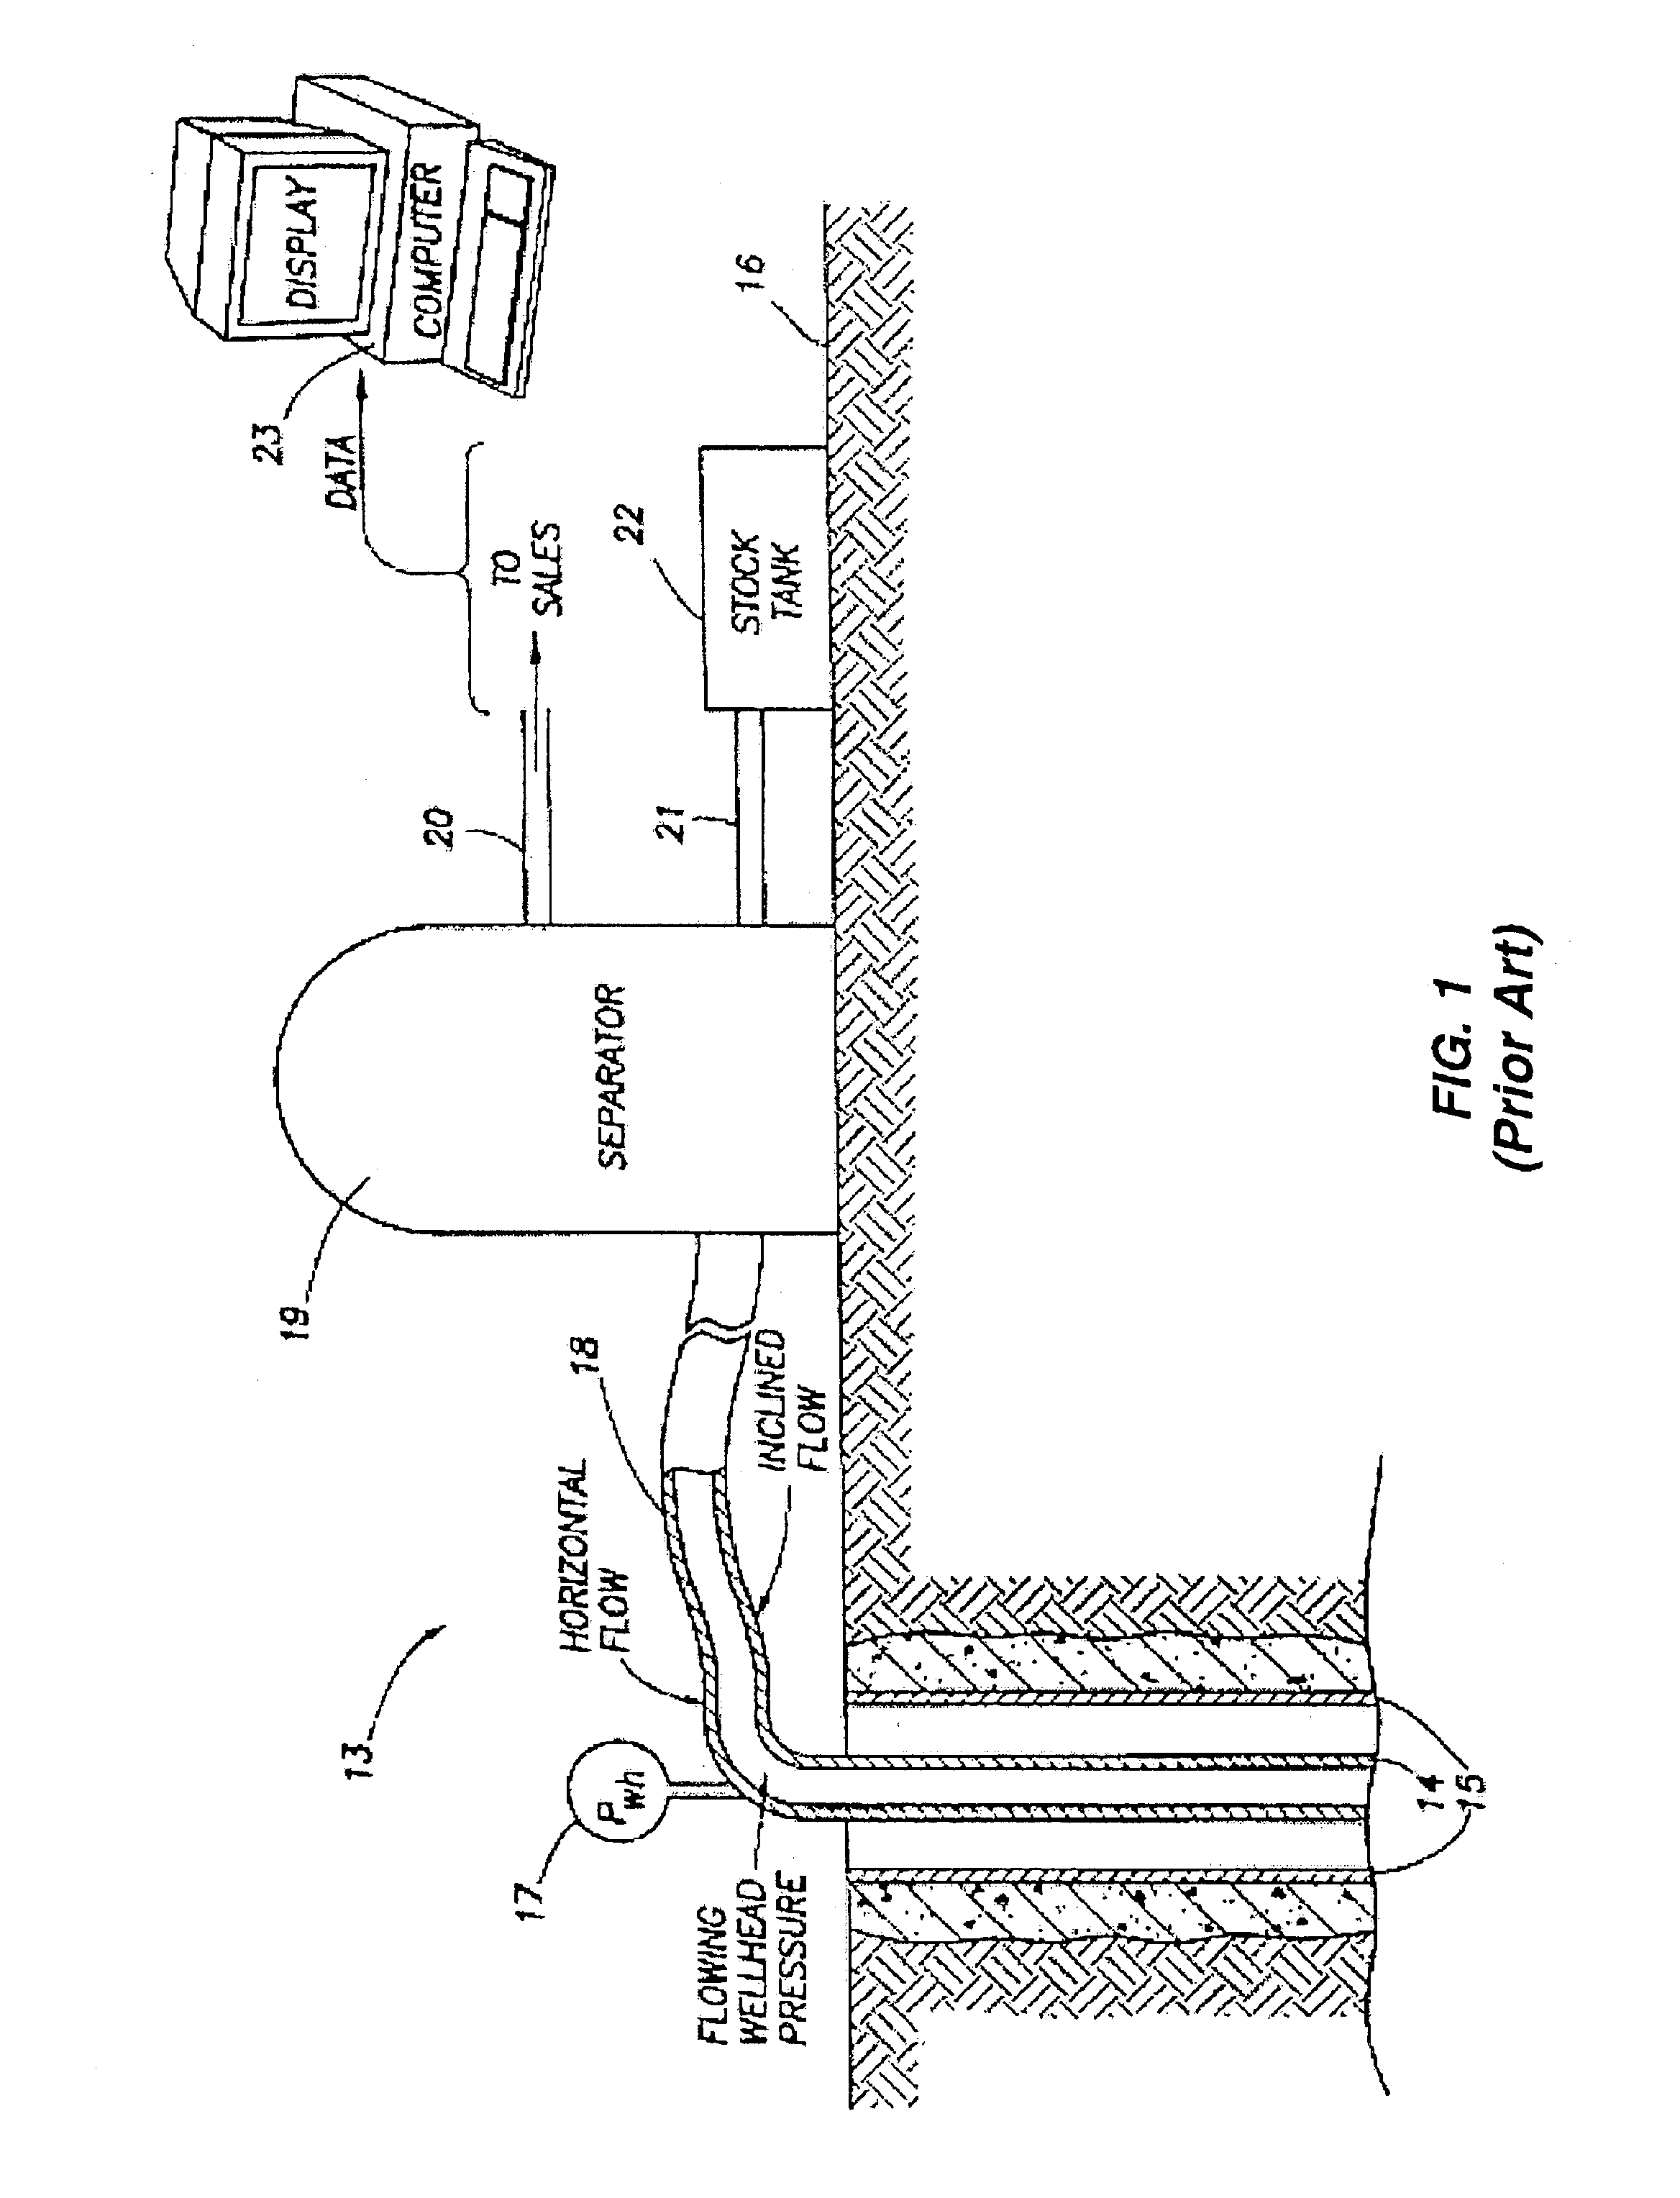 Method and apparatus for effective well and reservoir evaluation without the need for well pressure history